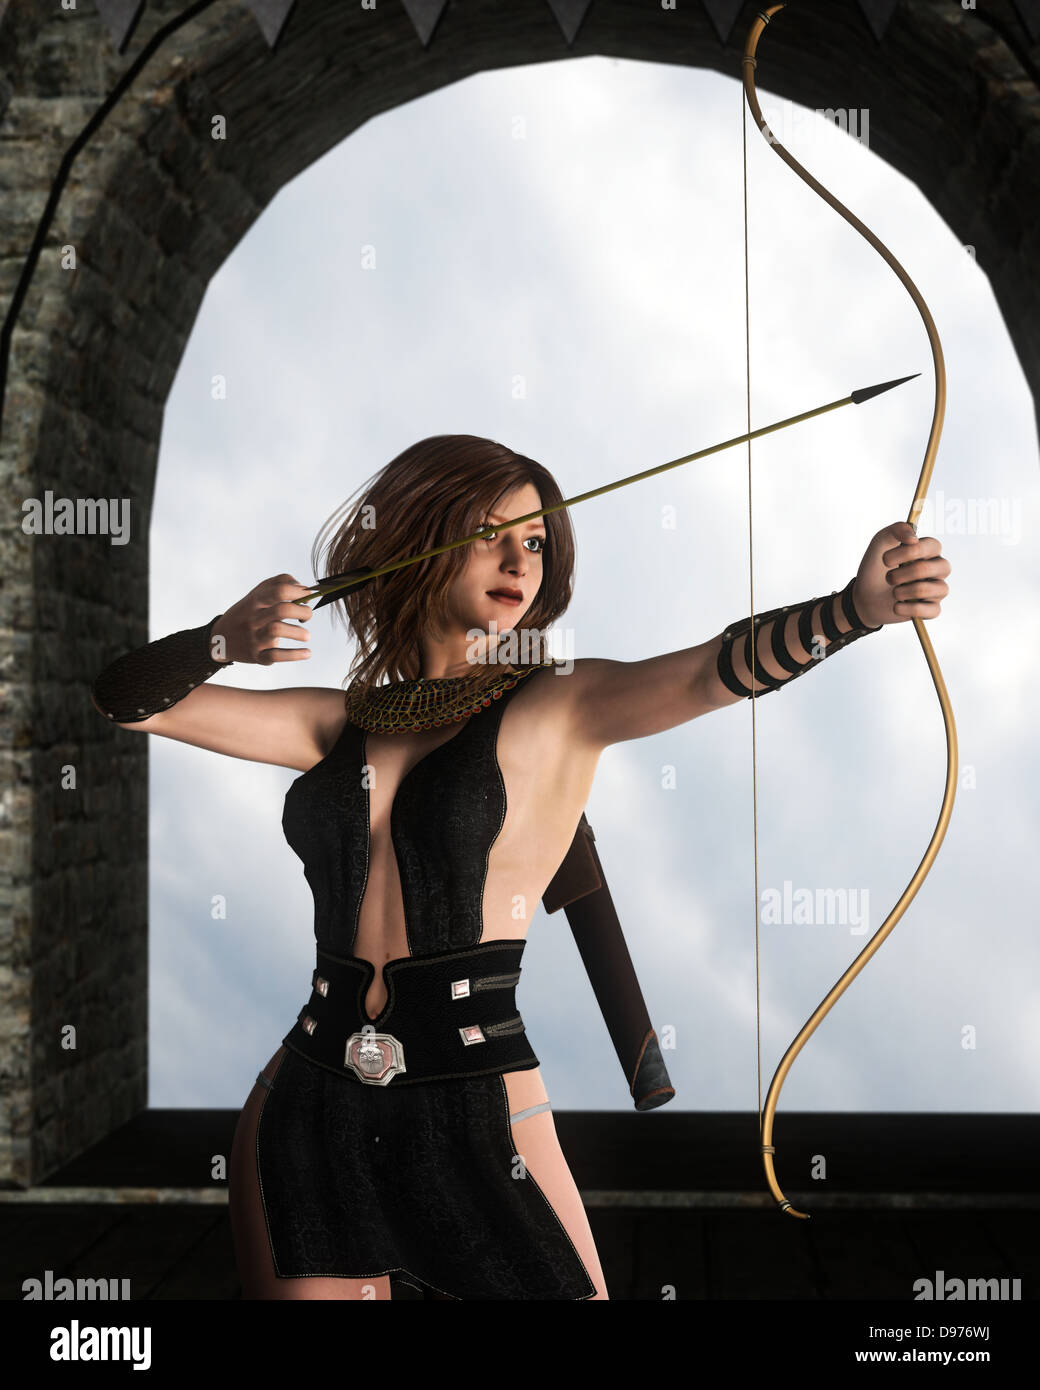 Female warrior drawing bow Stock Photo